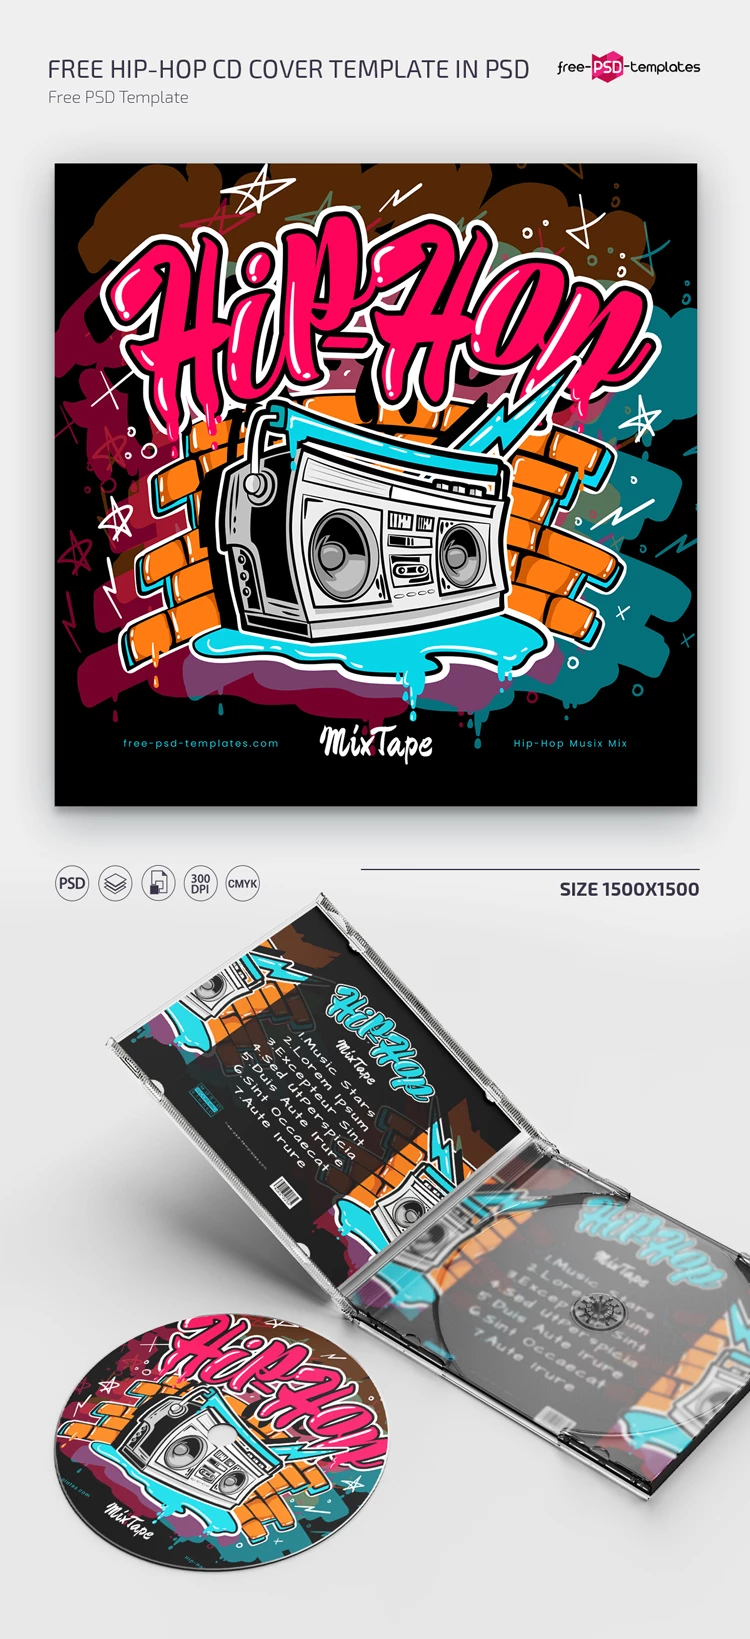 Free Hip Hop CD Cover Template in PSD